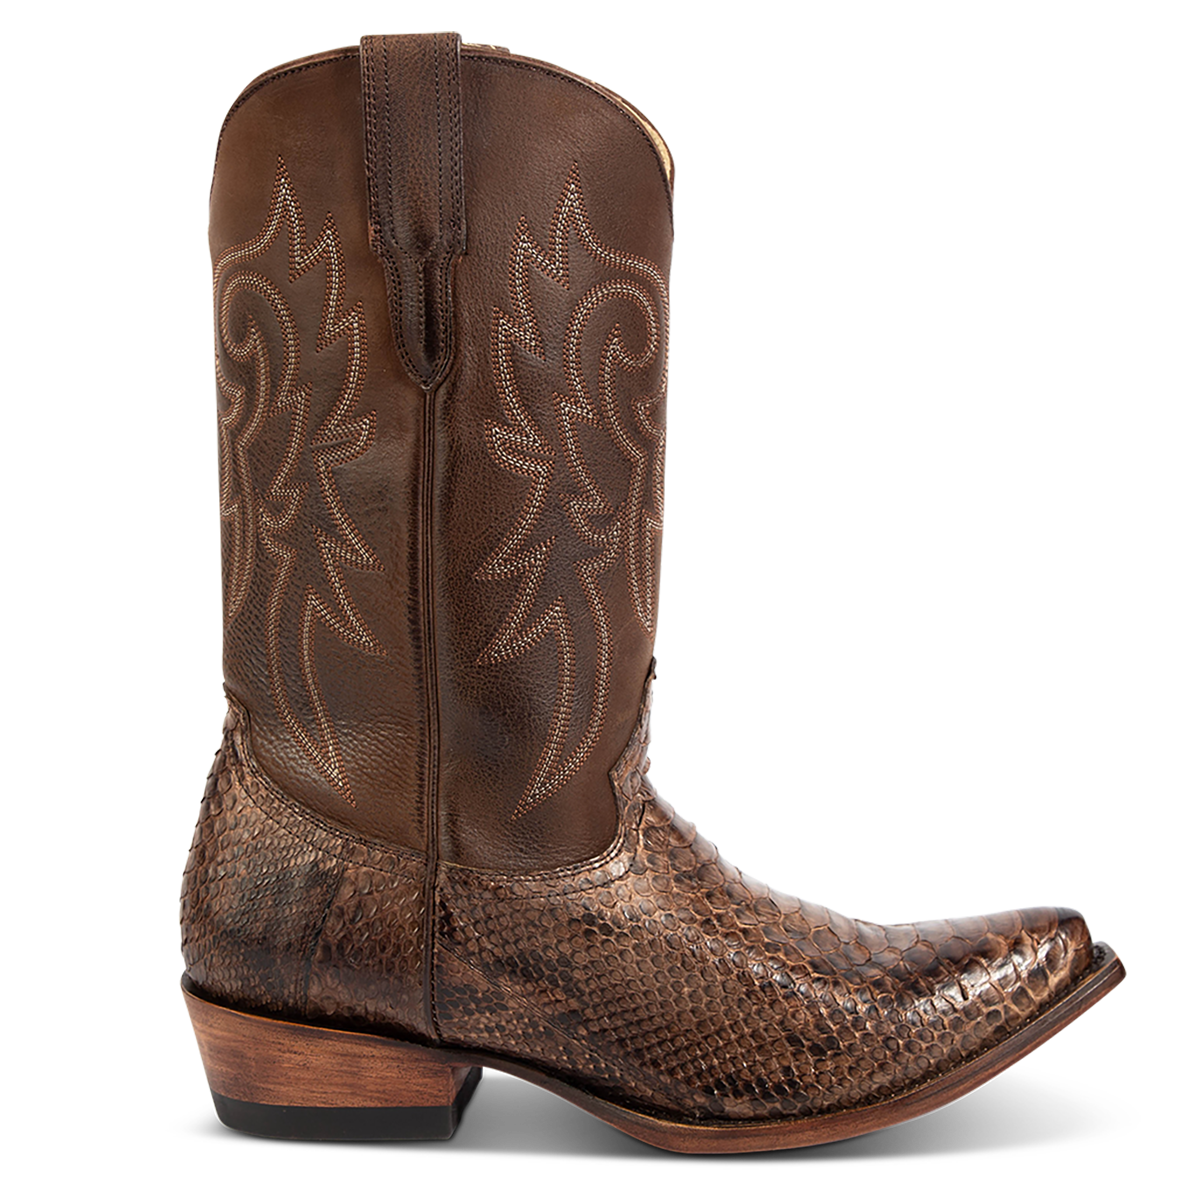 FREEBIRD men's Marshall brown python leather western cowboy boot with shaft stitch detailing, snip toe construction and leather pull straps